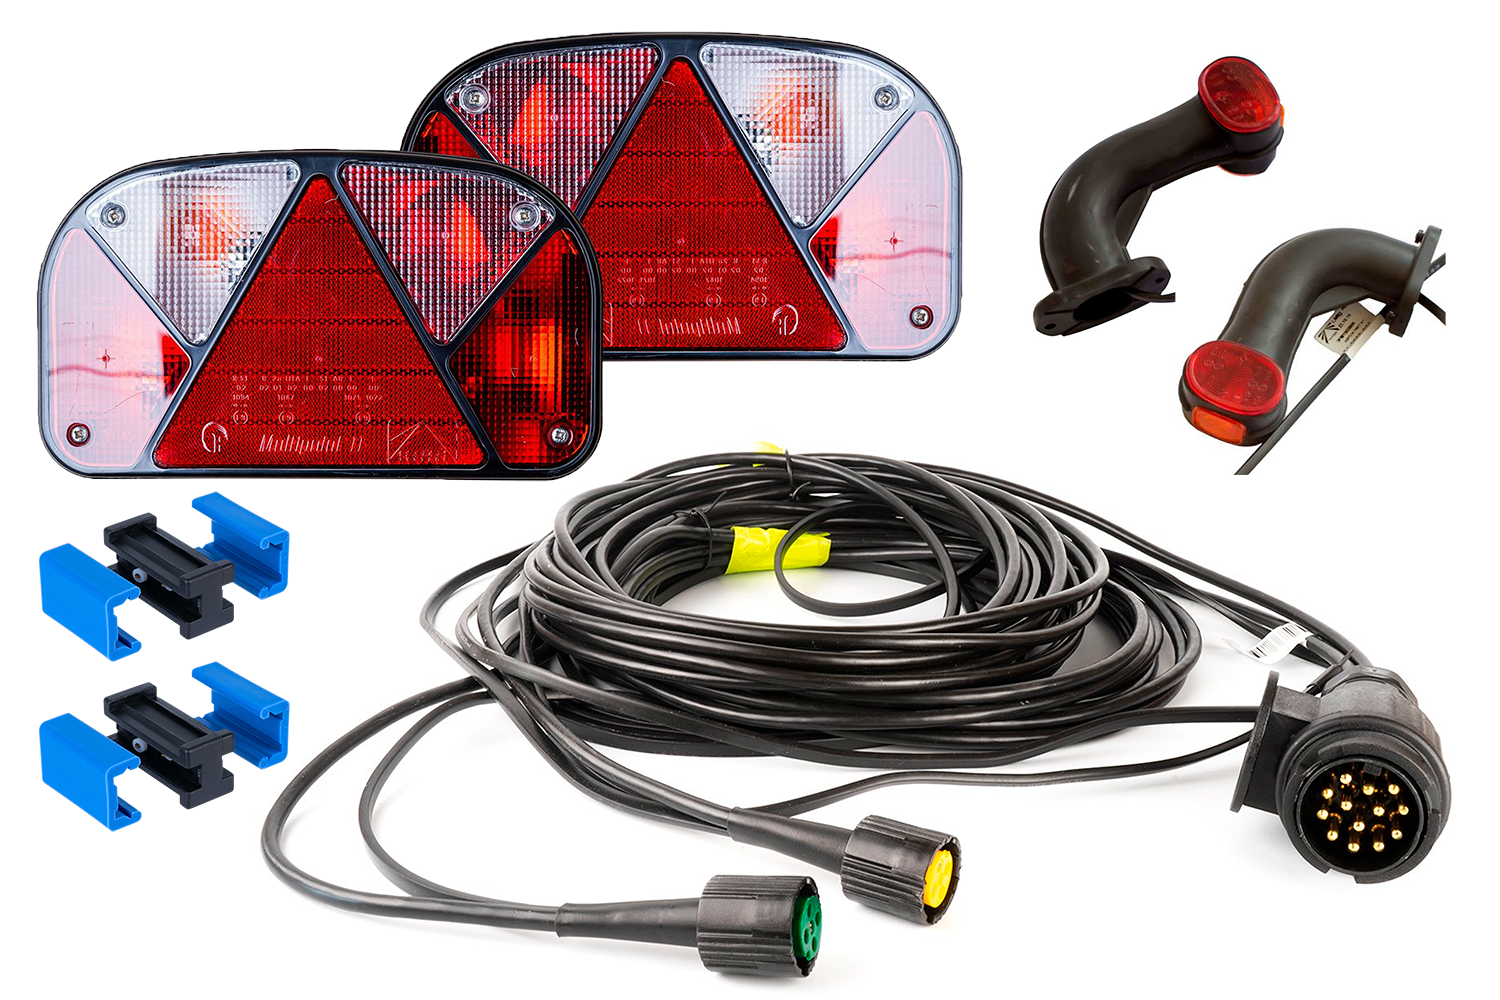 Set: Aspöck Multipoint II rear lights, Superpoint II side marker lights  with 7m 13-pin harness and quick splice couplers